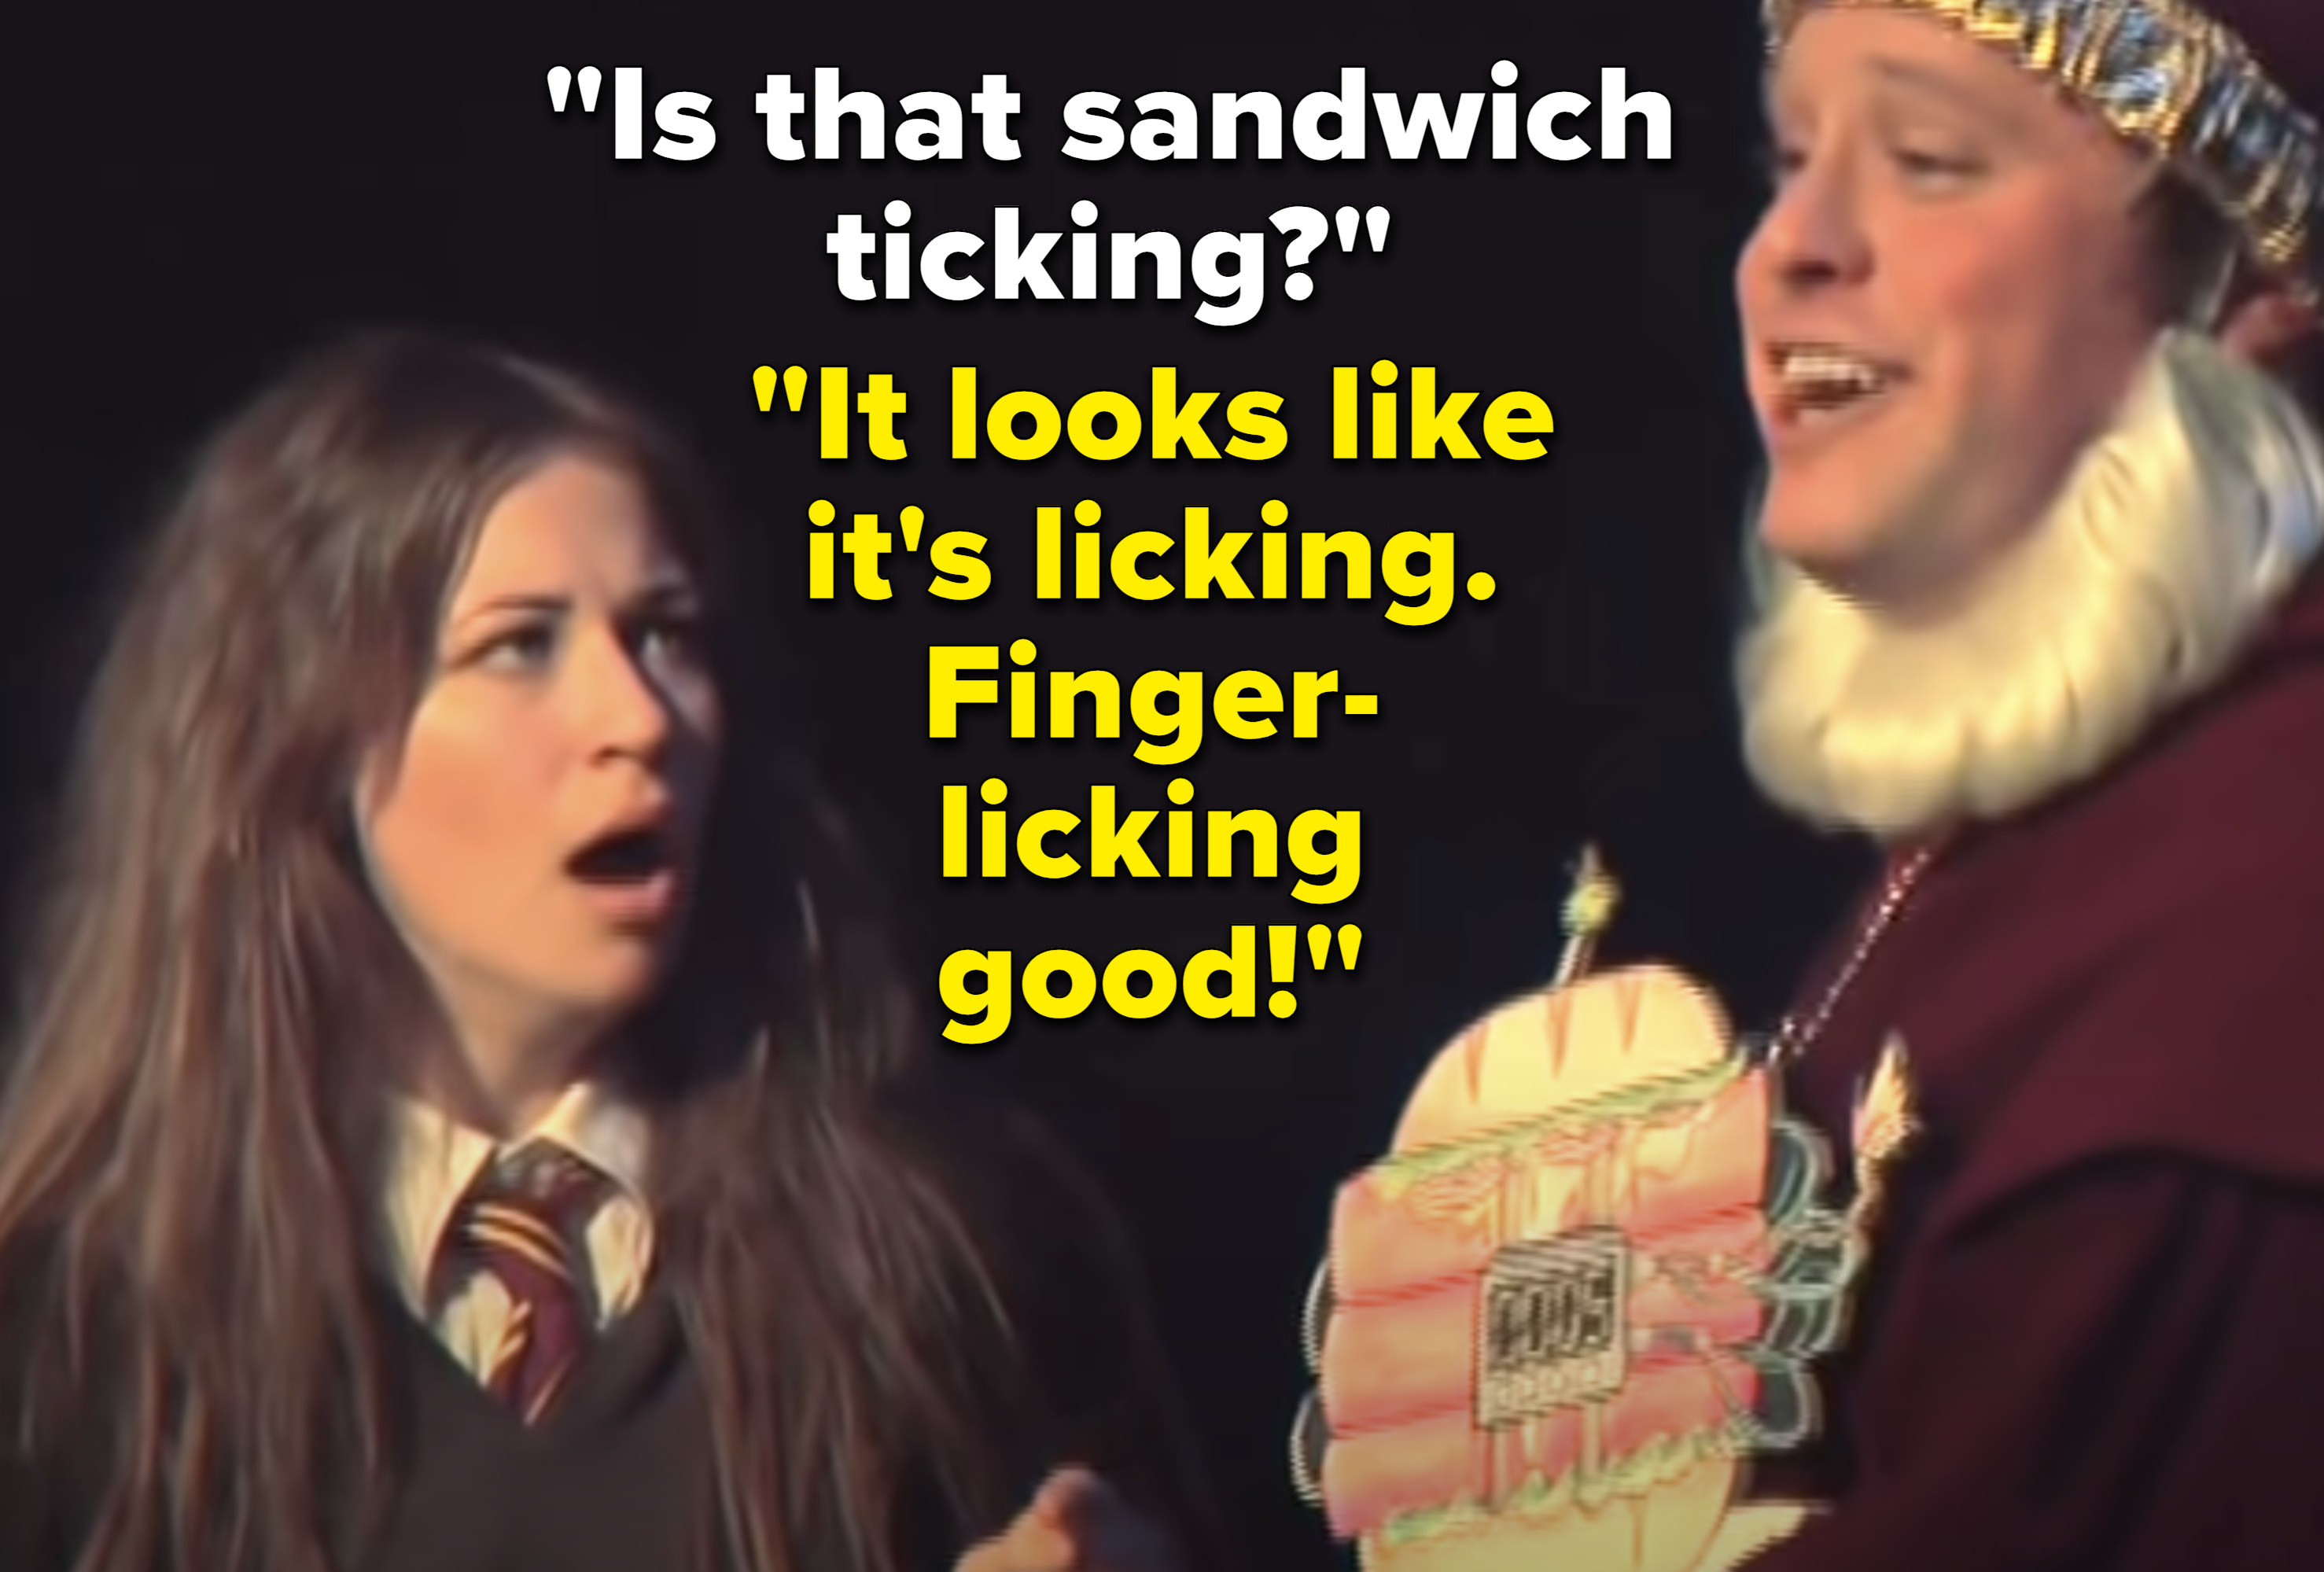 Hermione: &quot;Is that sandwich ticking?&quot; Dumbledore: &quot;It looks like it&#x27;s licking. Finger-licking good!&quot;